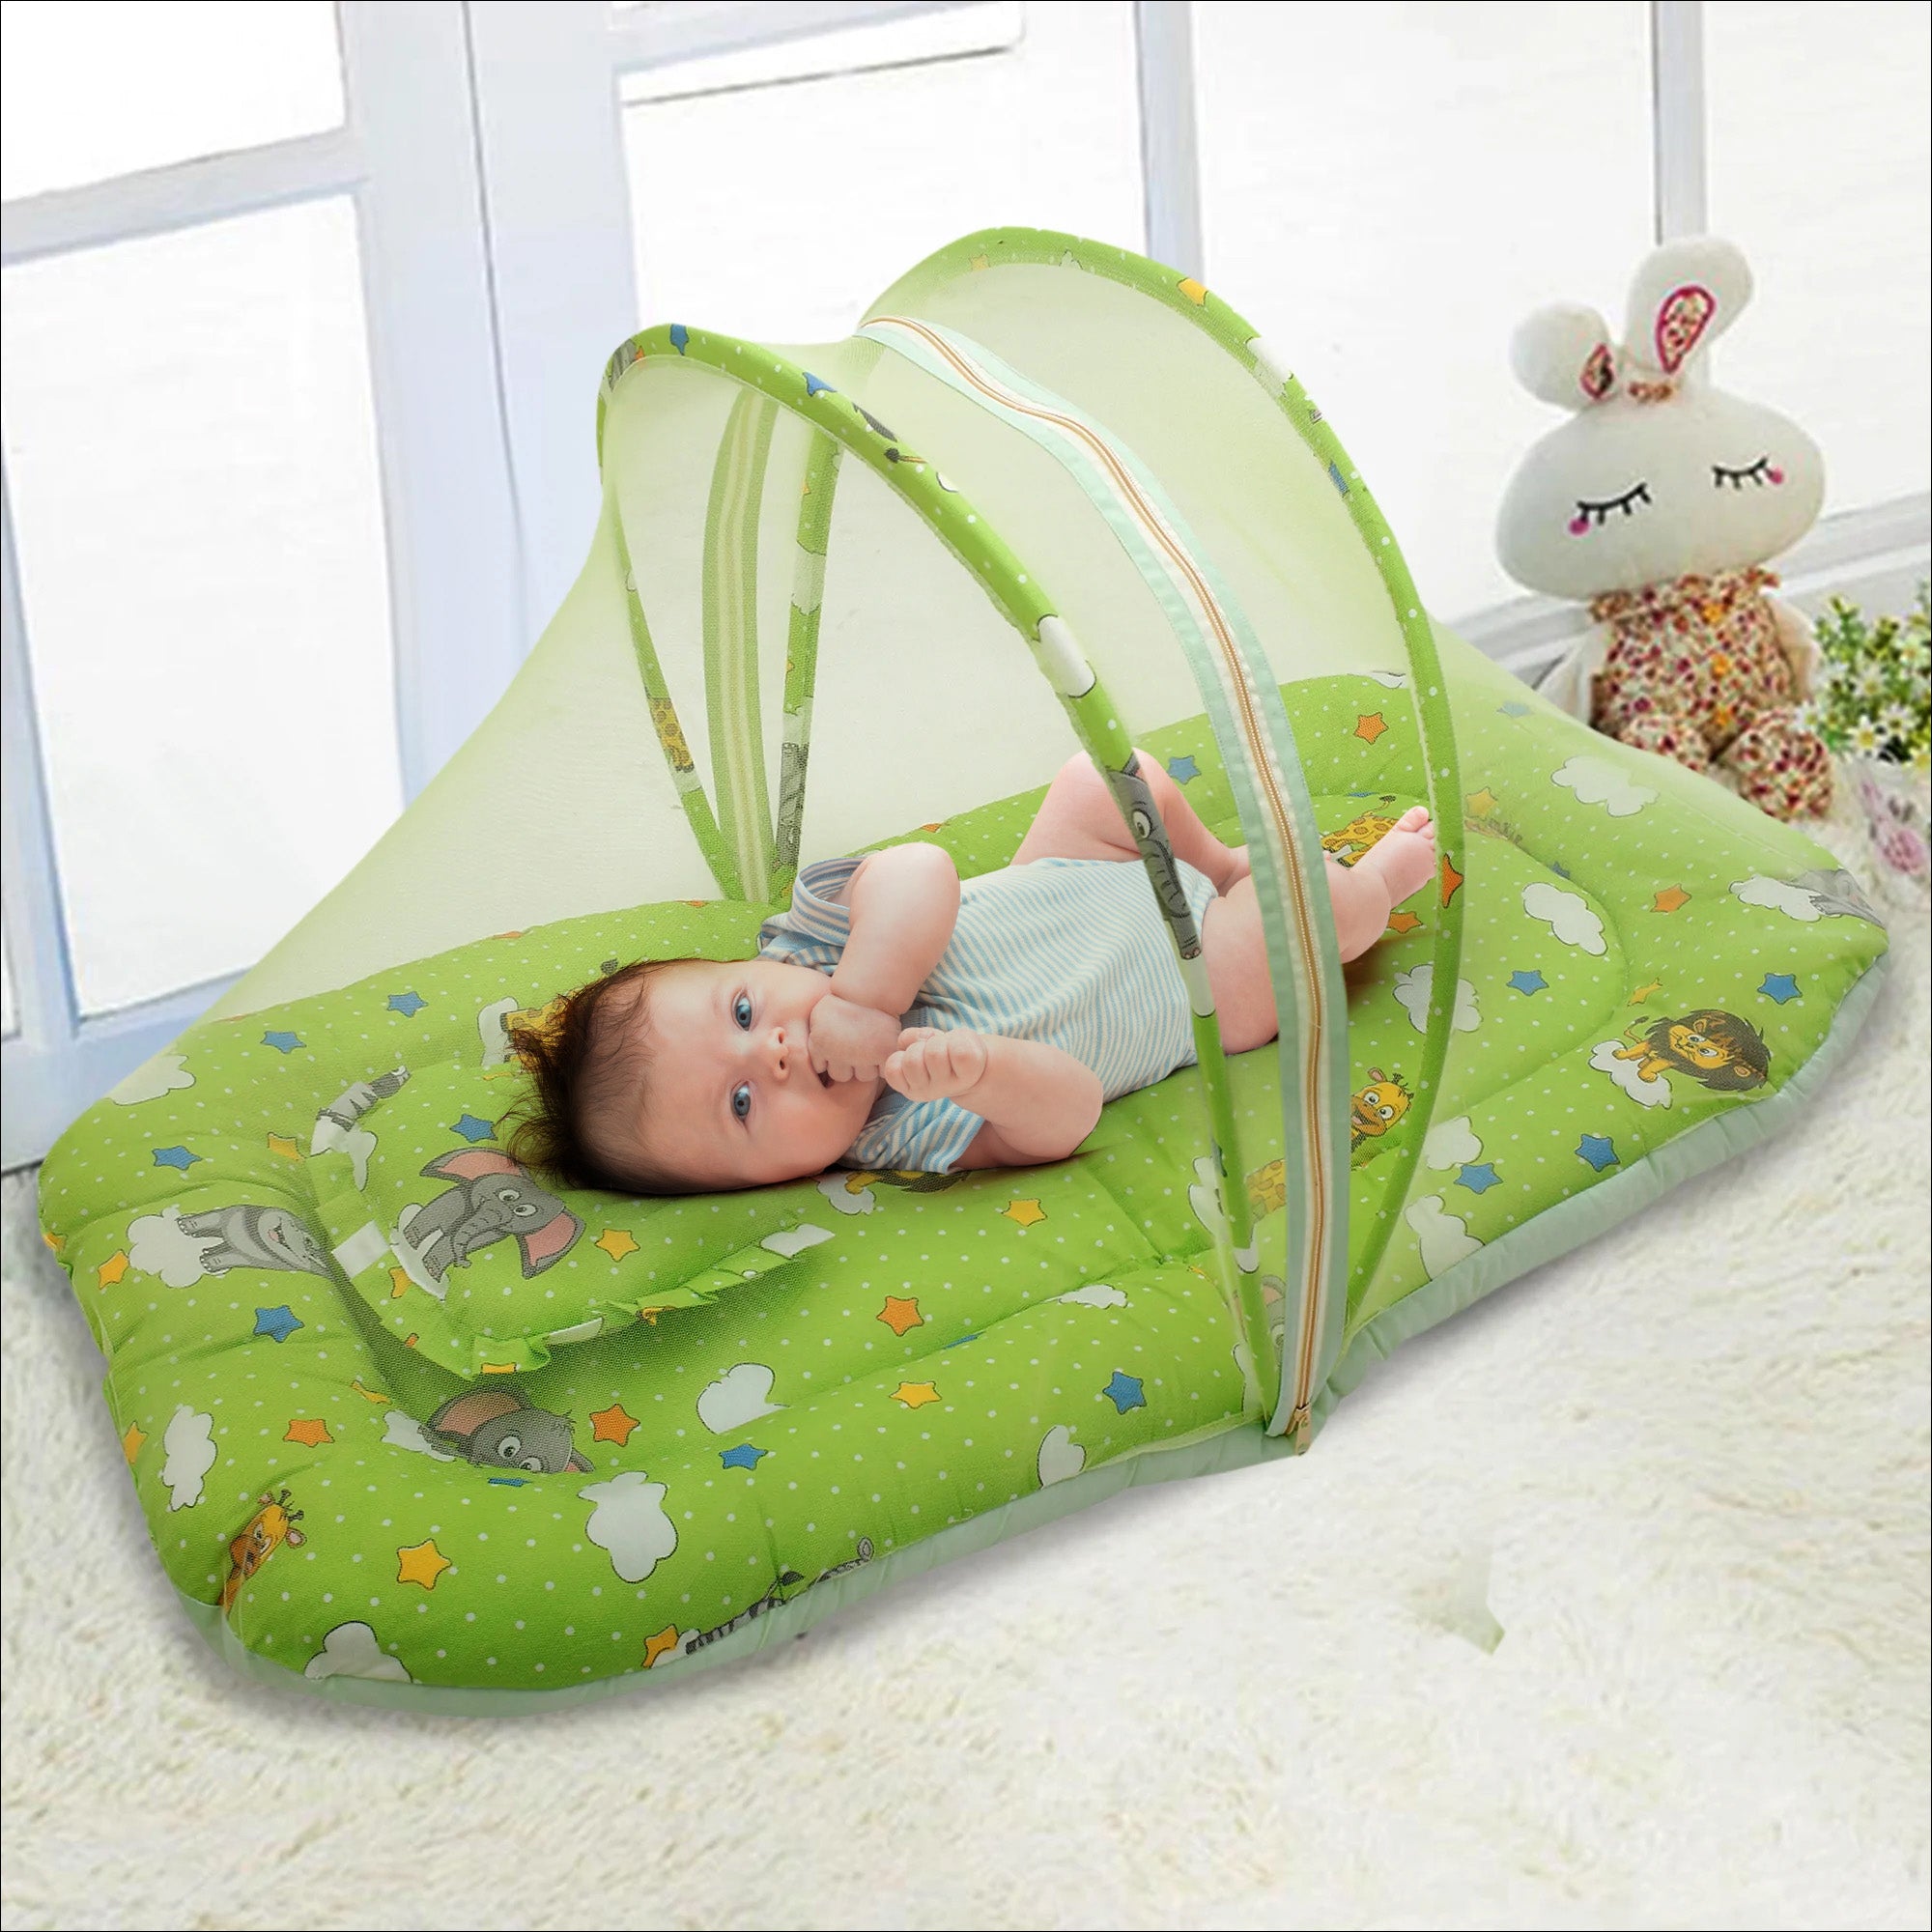 Baby Moo Tent Mattress Set with Neck Pillow Fun In The Jungle Green